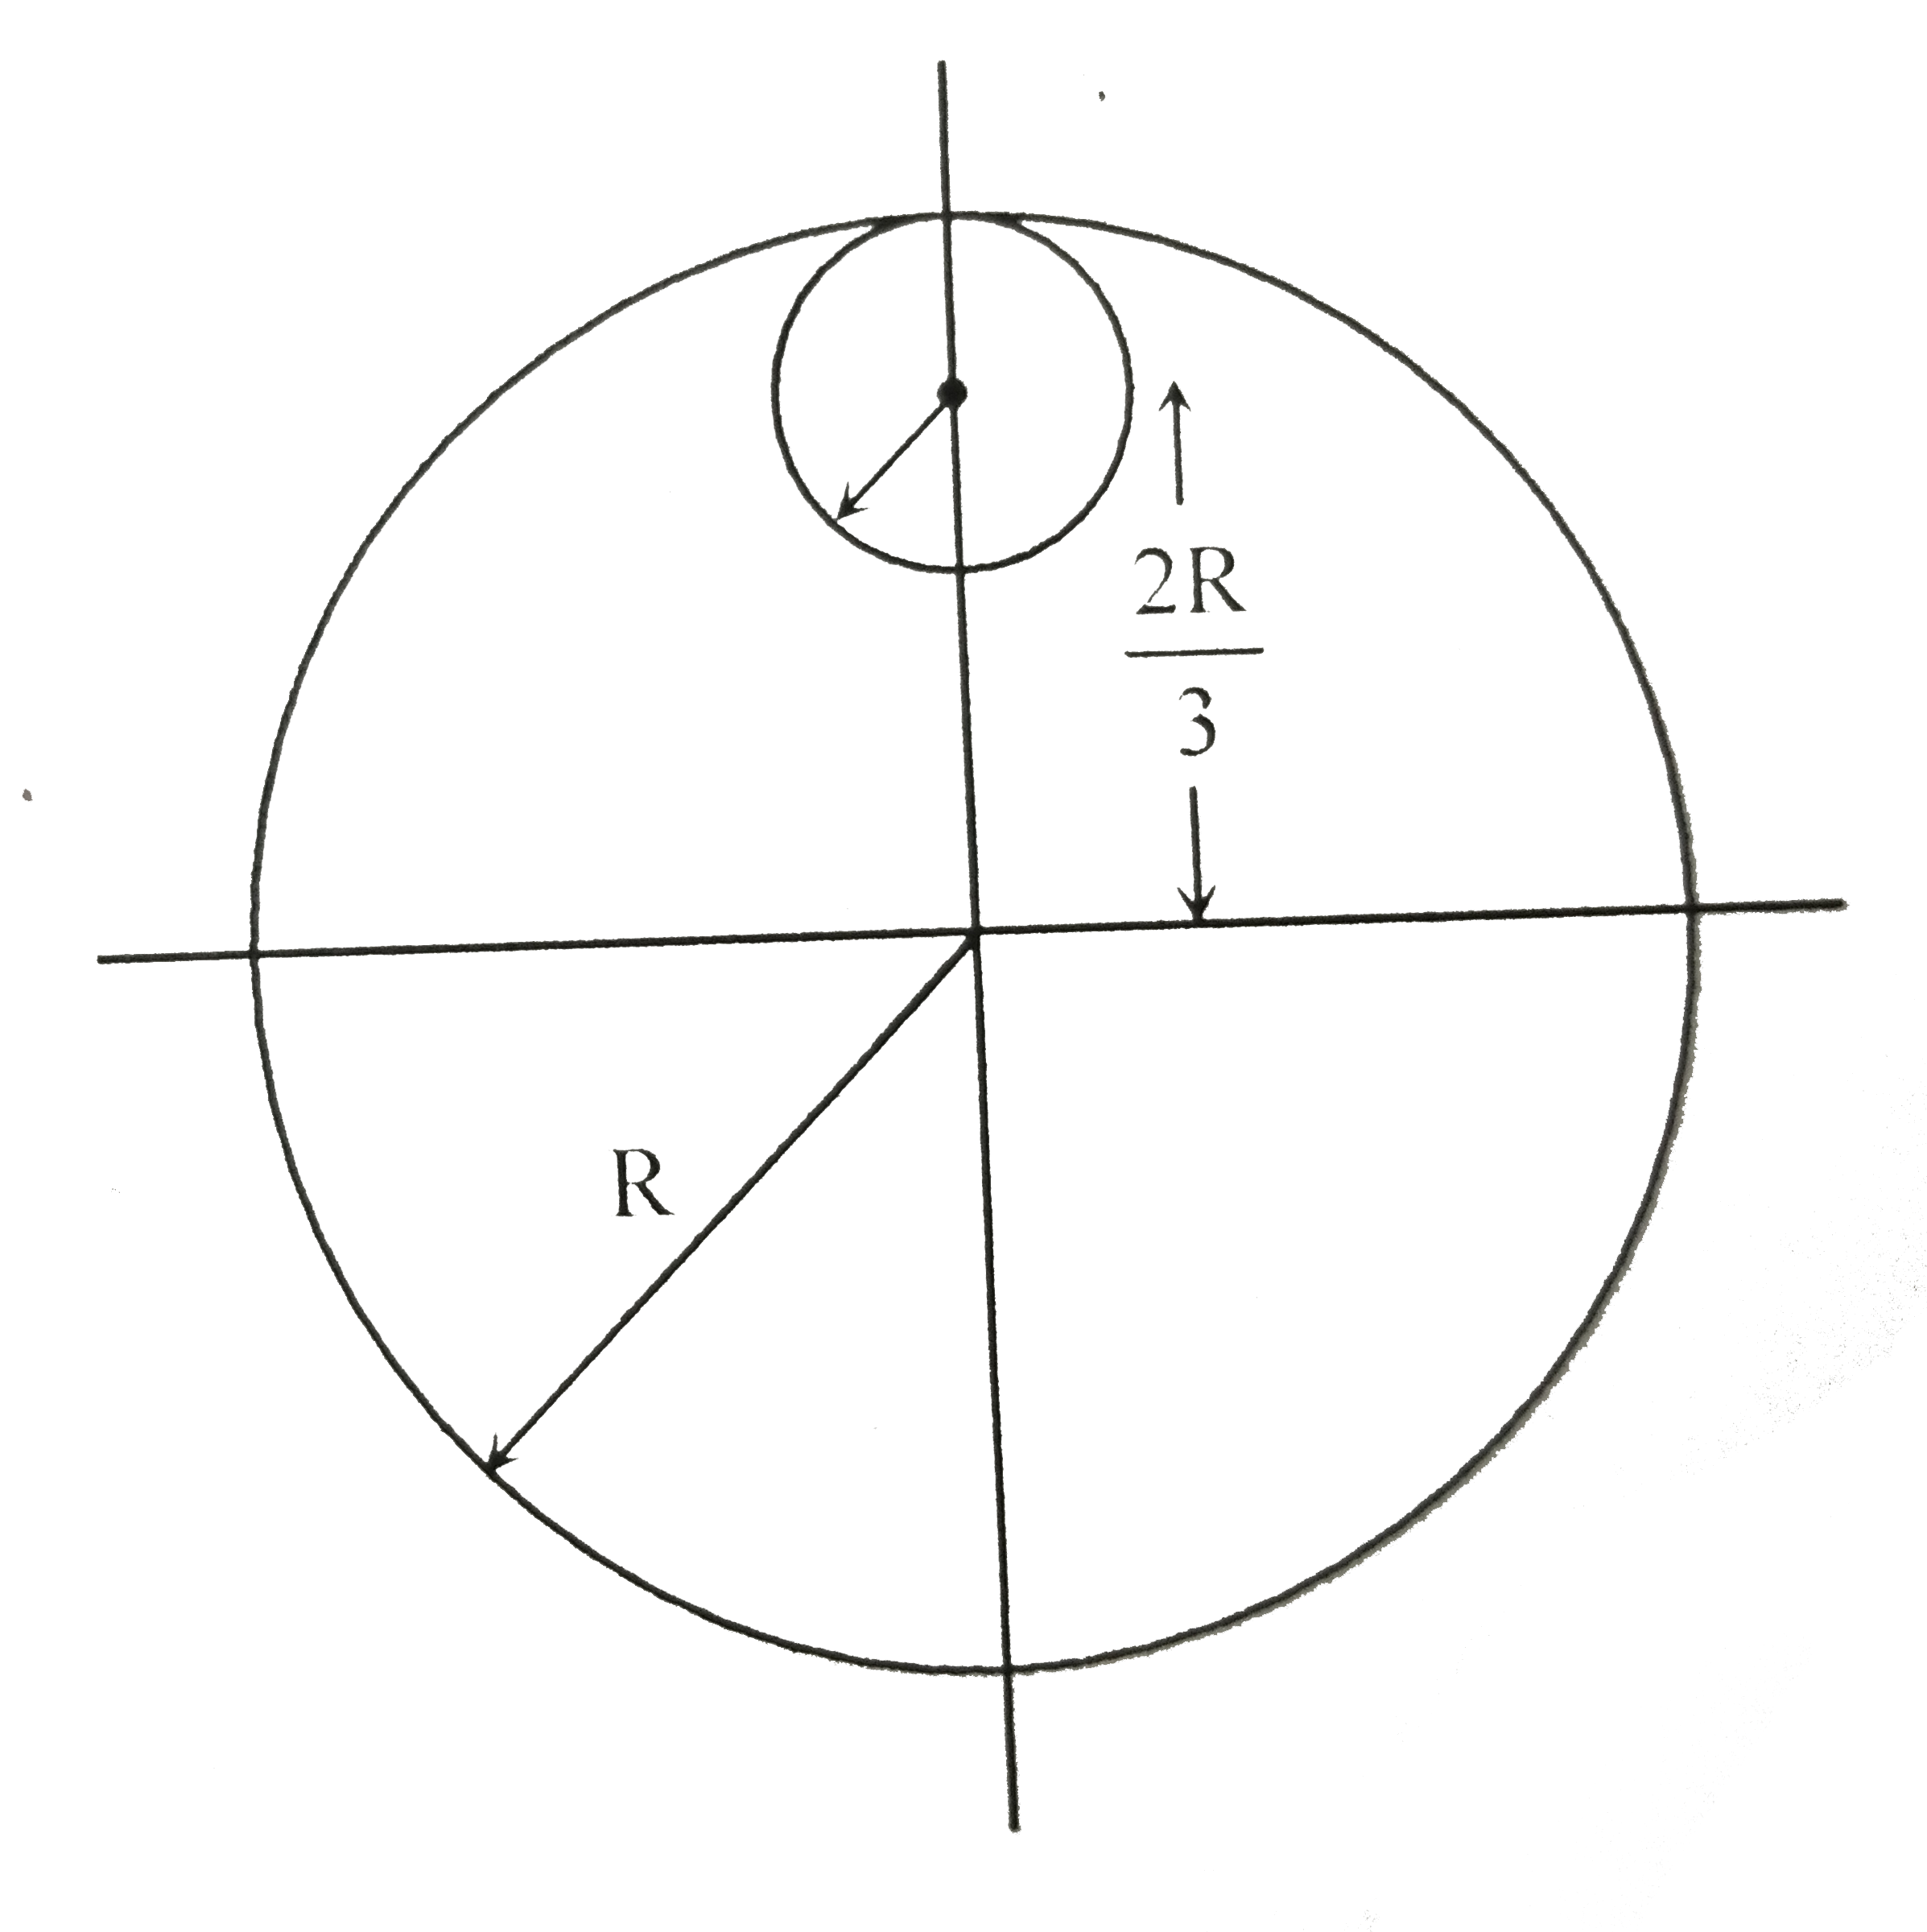 From a uniform circular disc of radius R and mass 9M, a small disc of radius (R )/(3) is removed as shown in the figure. The moment of inertia of the remaining disc about an axis perpendicular to the plane of the disc and passing through centre of disc is :